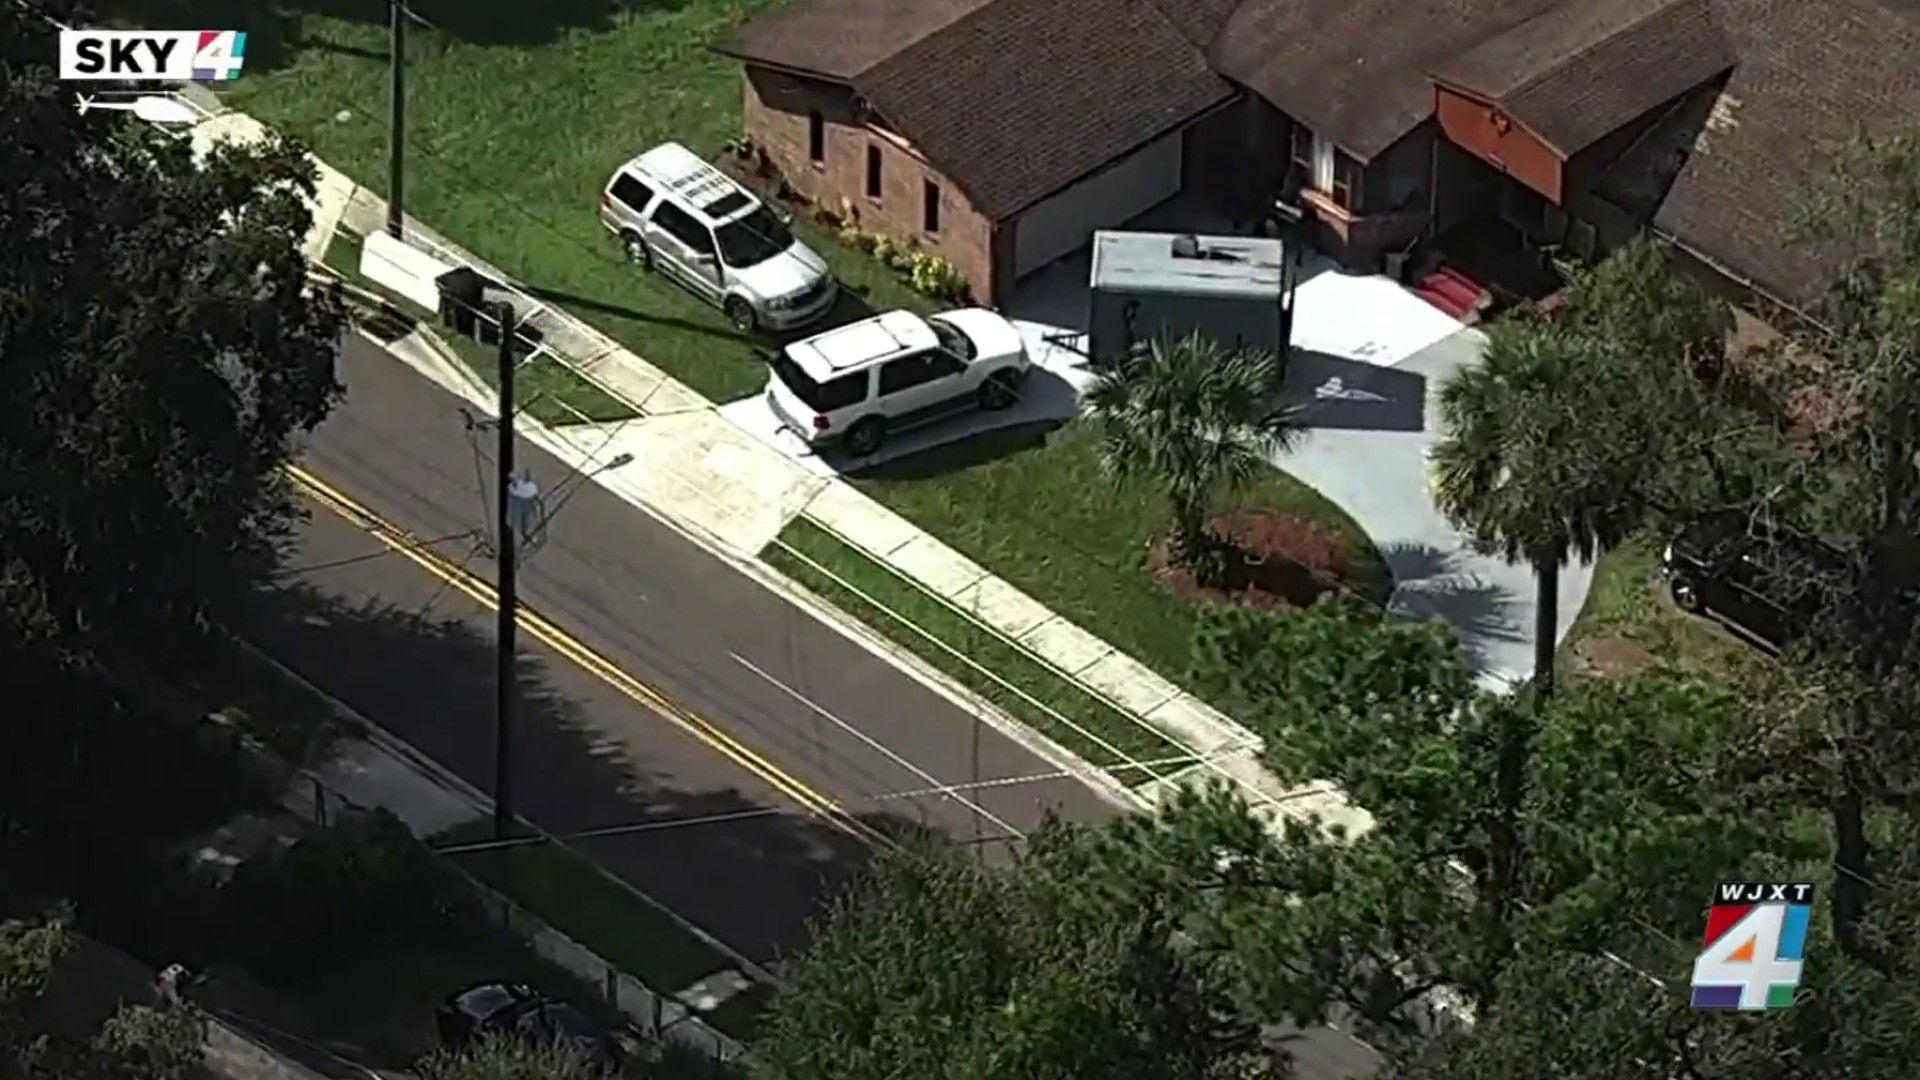 Foul play suspected after woman found dead in Moncrief neighborhood, police say